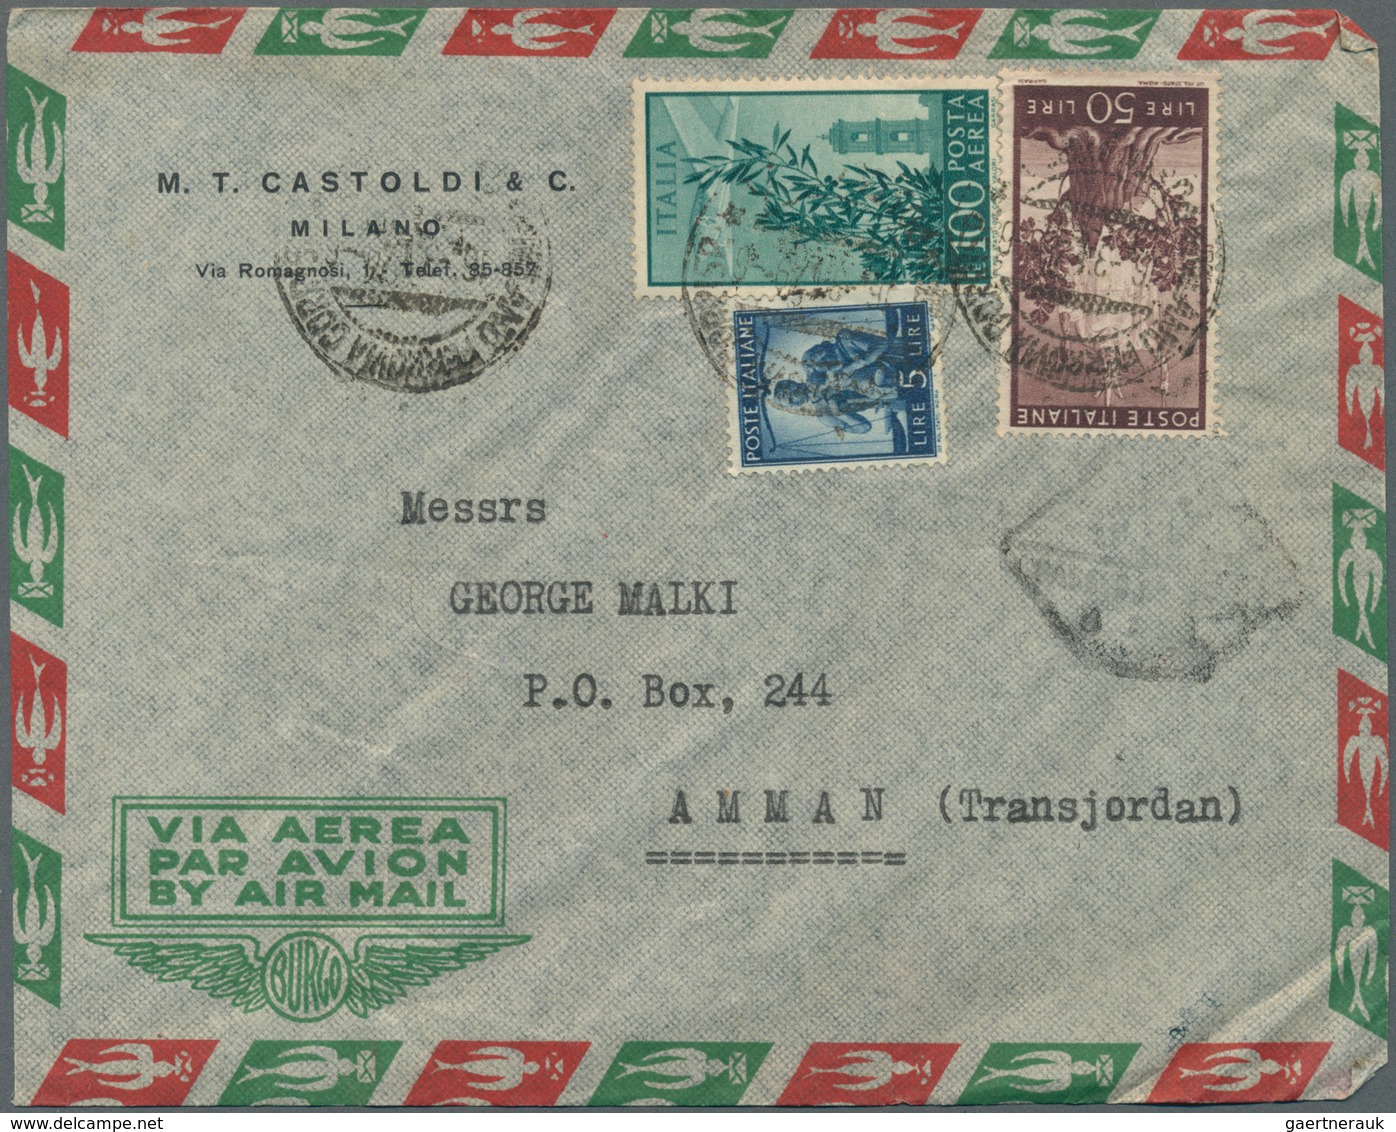 Übersee: 1949/1980, assortment of apprx. 260 entires with commercial and philatelic covers, mainly A